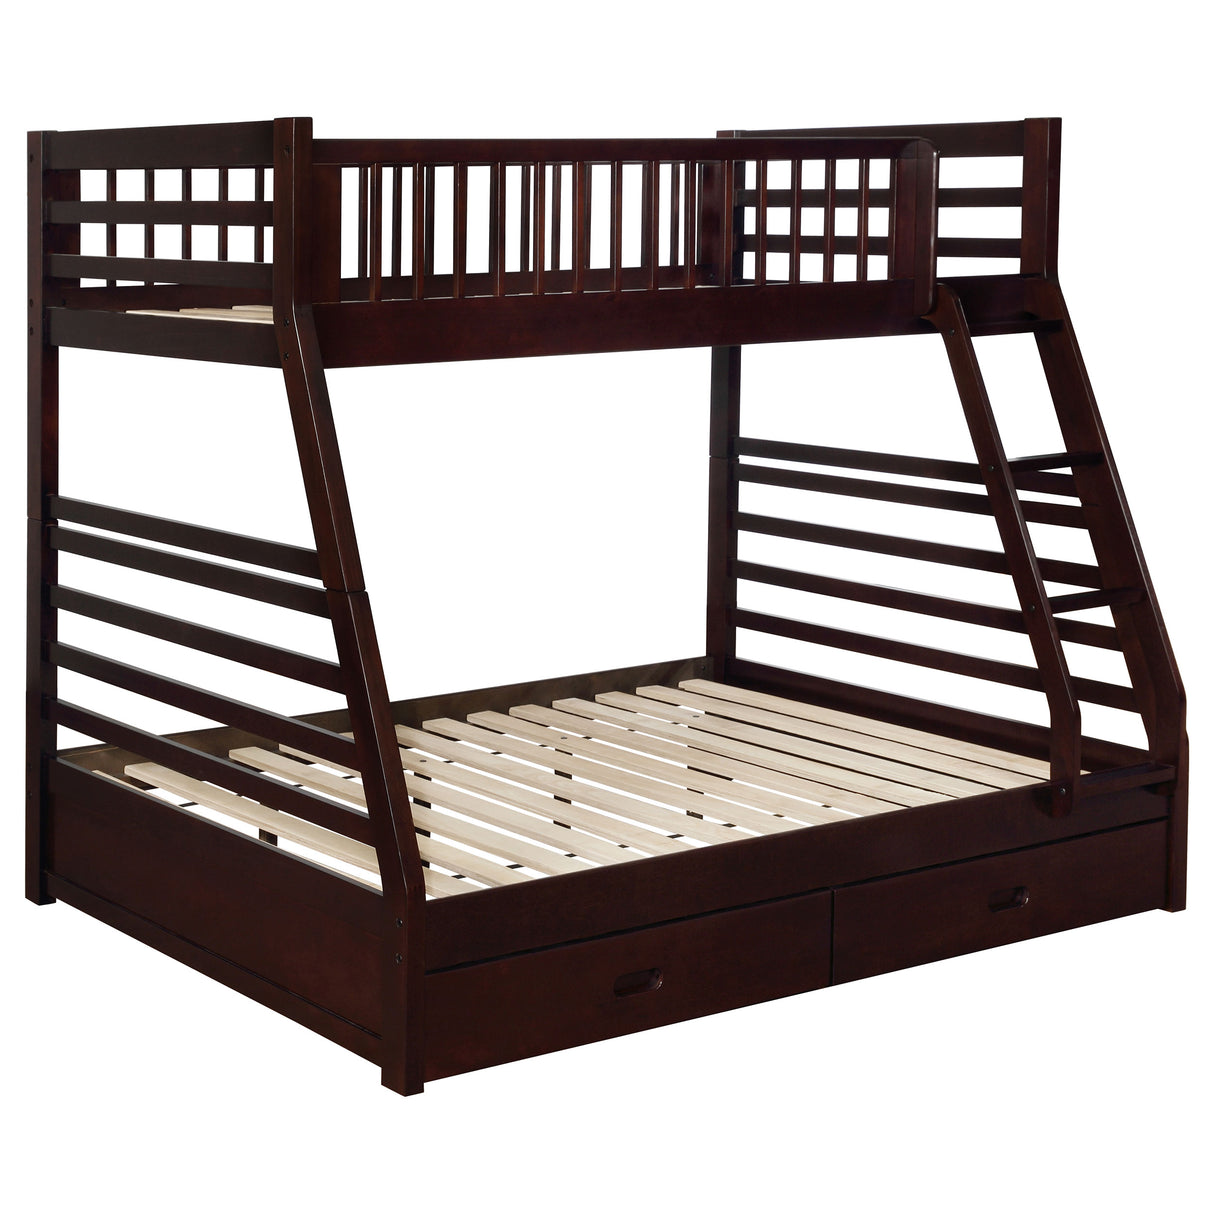 Twin / Full Bunk Bed - Ashton Twin Over Full 2-drawer Bunk Bed Cappuccino